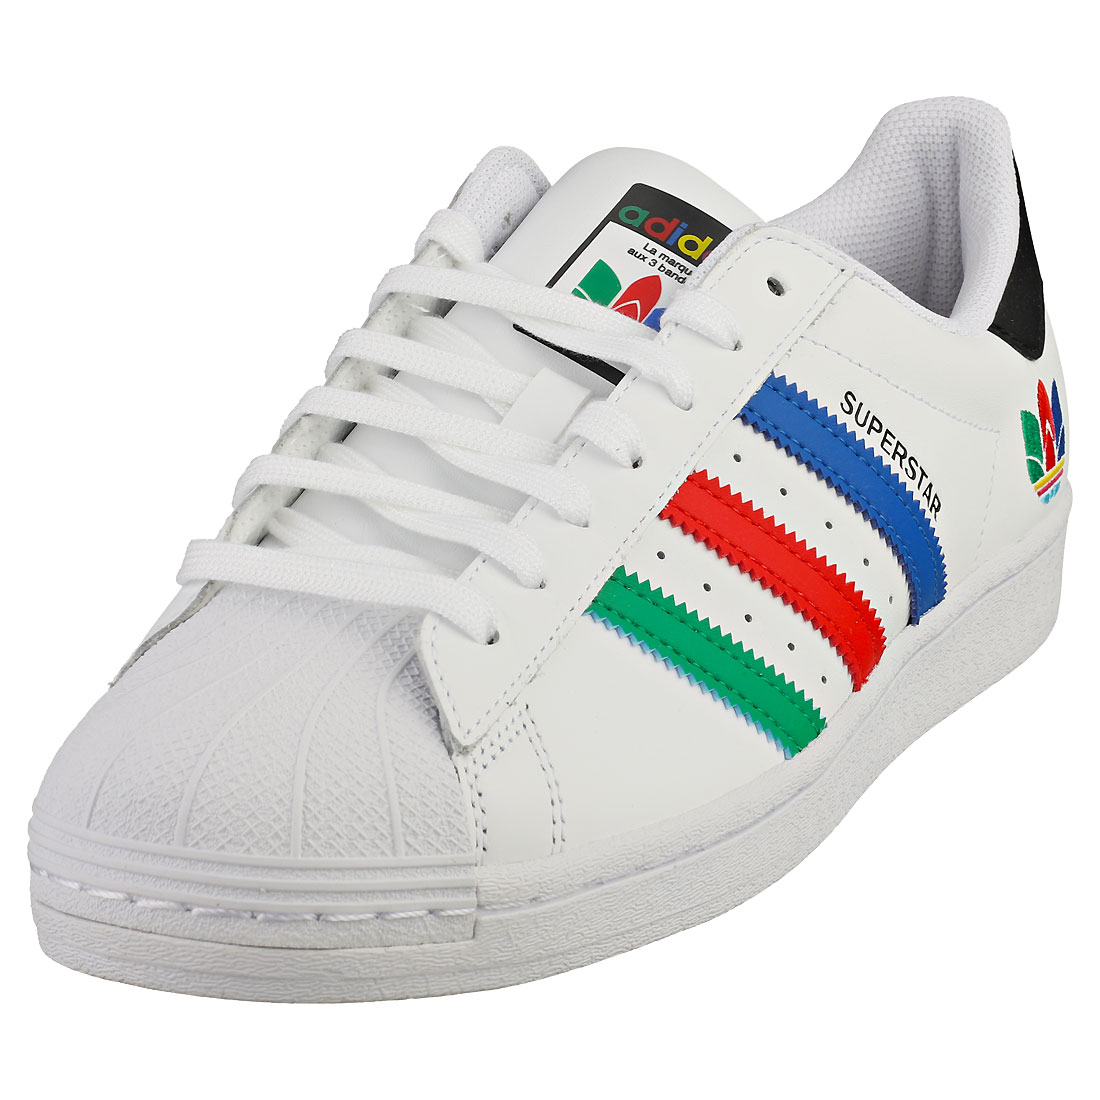 adidas Superstar Mens White Multicolour Leather Fashion Trainers | eBay